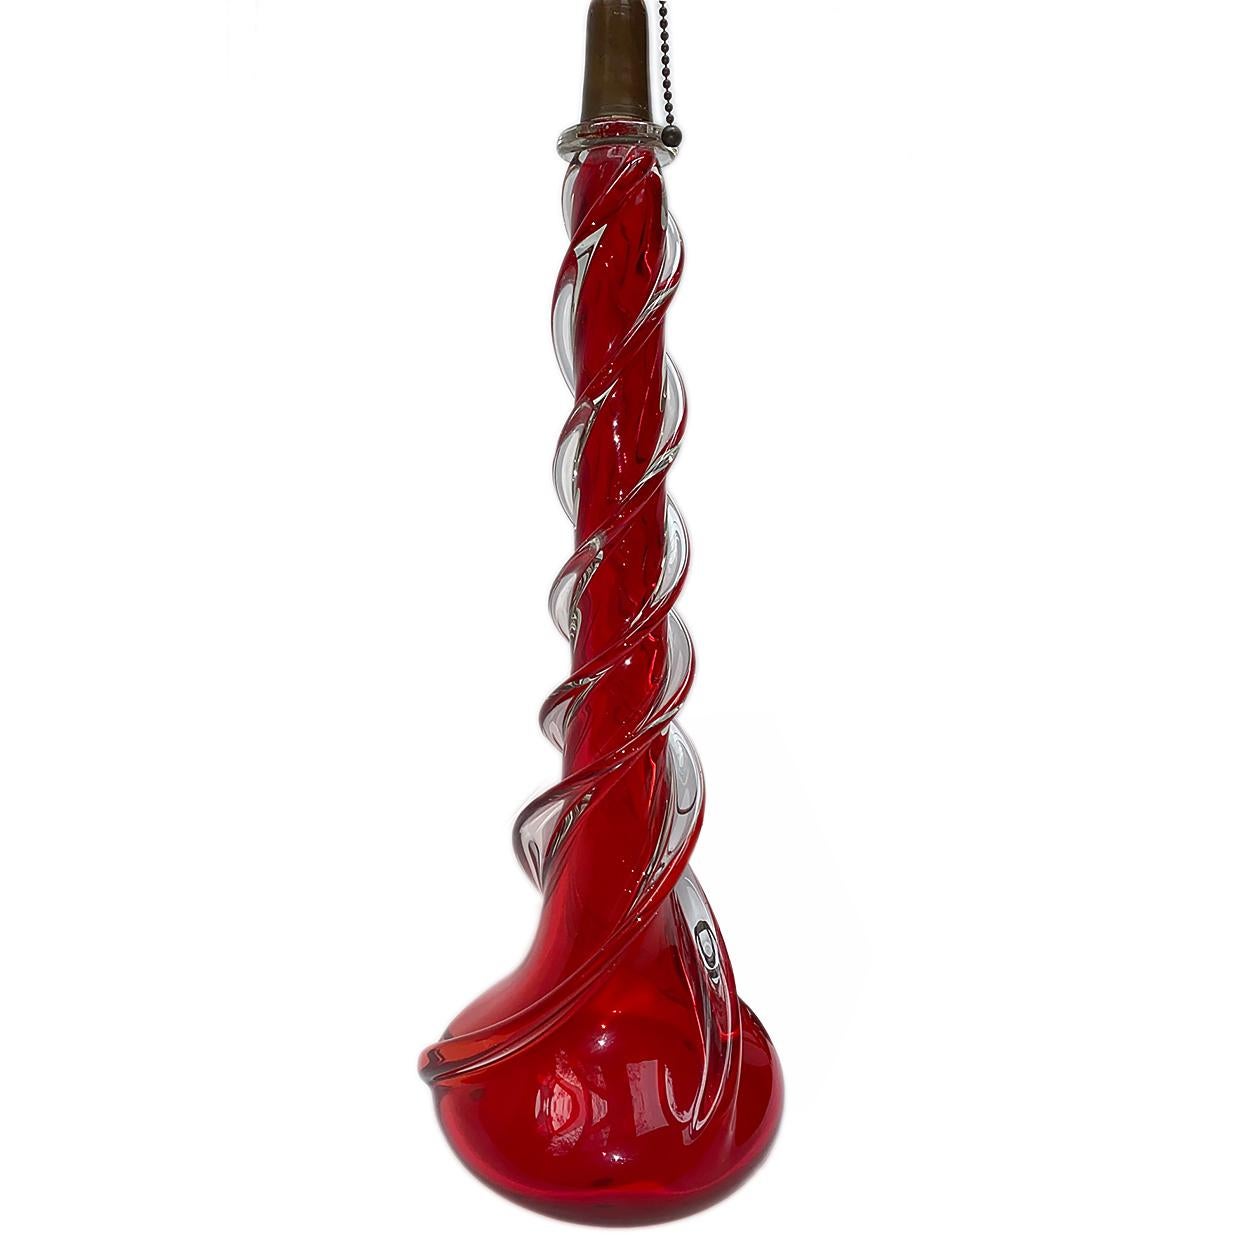 Murano deep red Murano glass encased in clear glass, circa 1930s

Measurements:
Height of body: 17.5